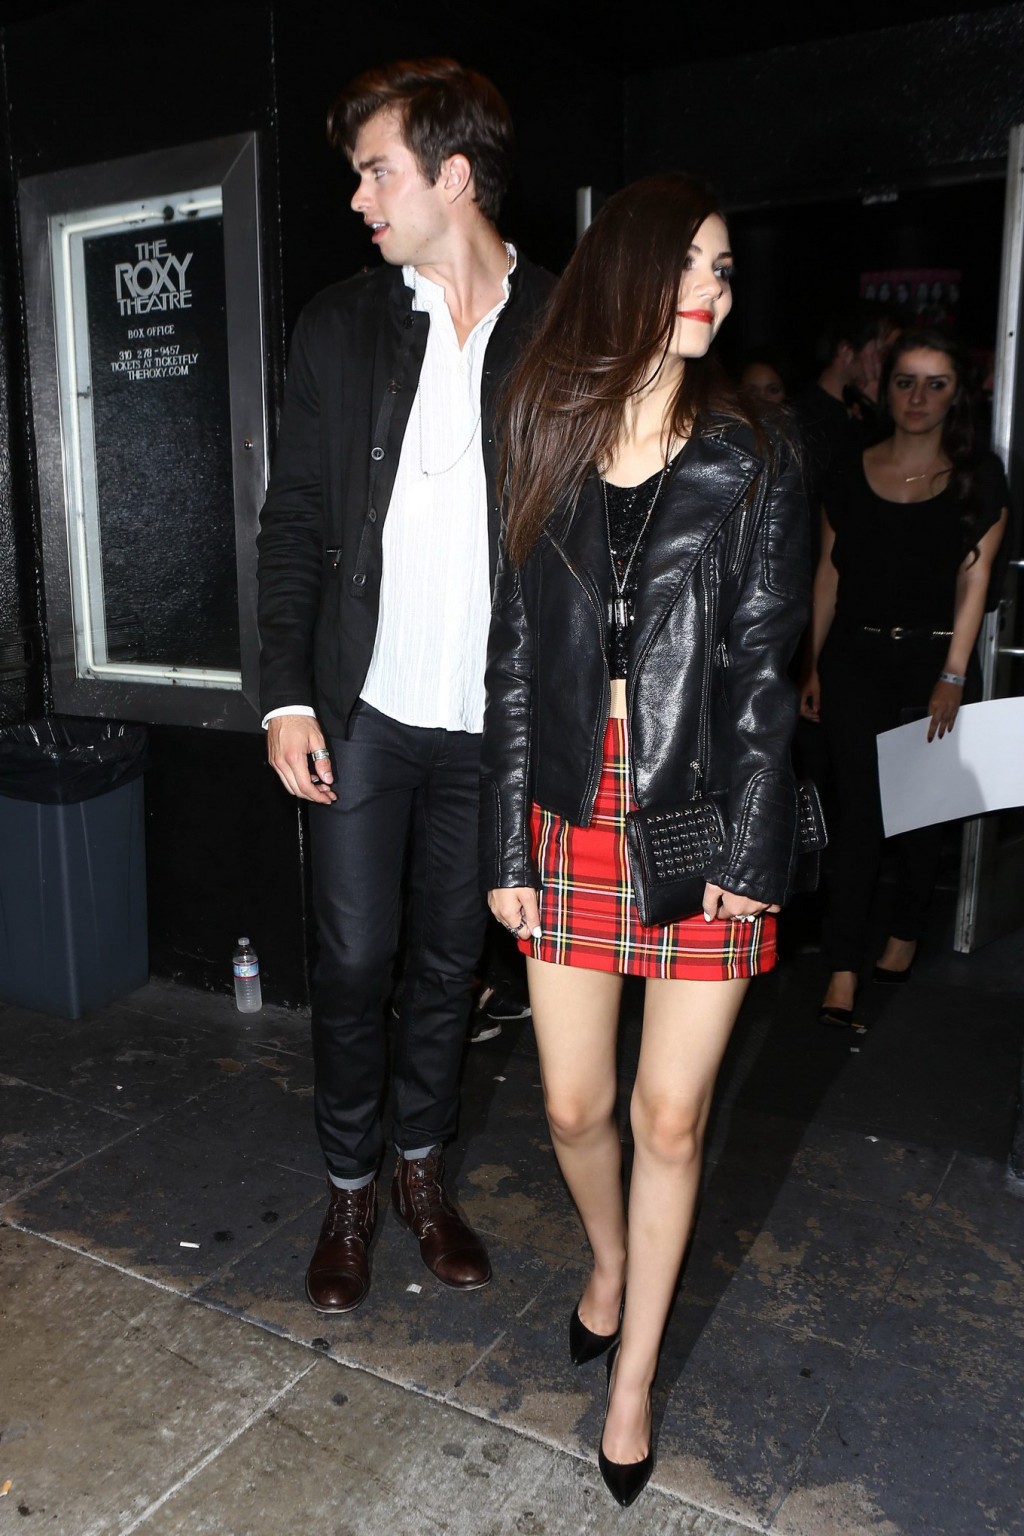 Victoria Justice leggy in plaid mini skirt leaving the Roxy Theatre in West Holl #75195061